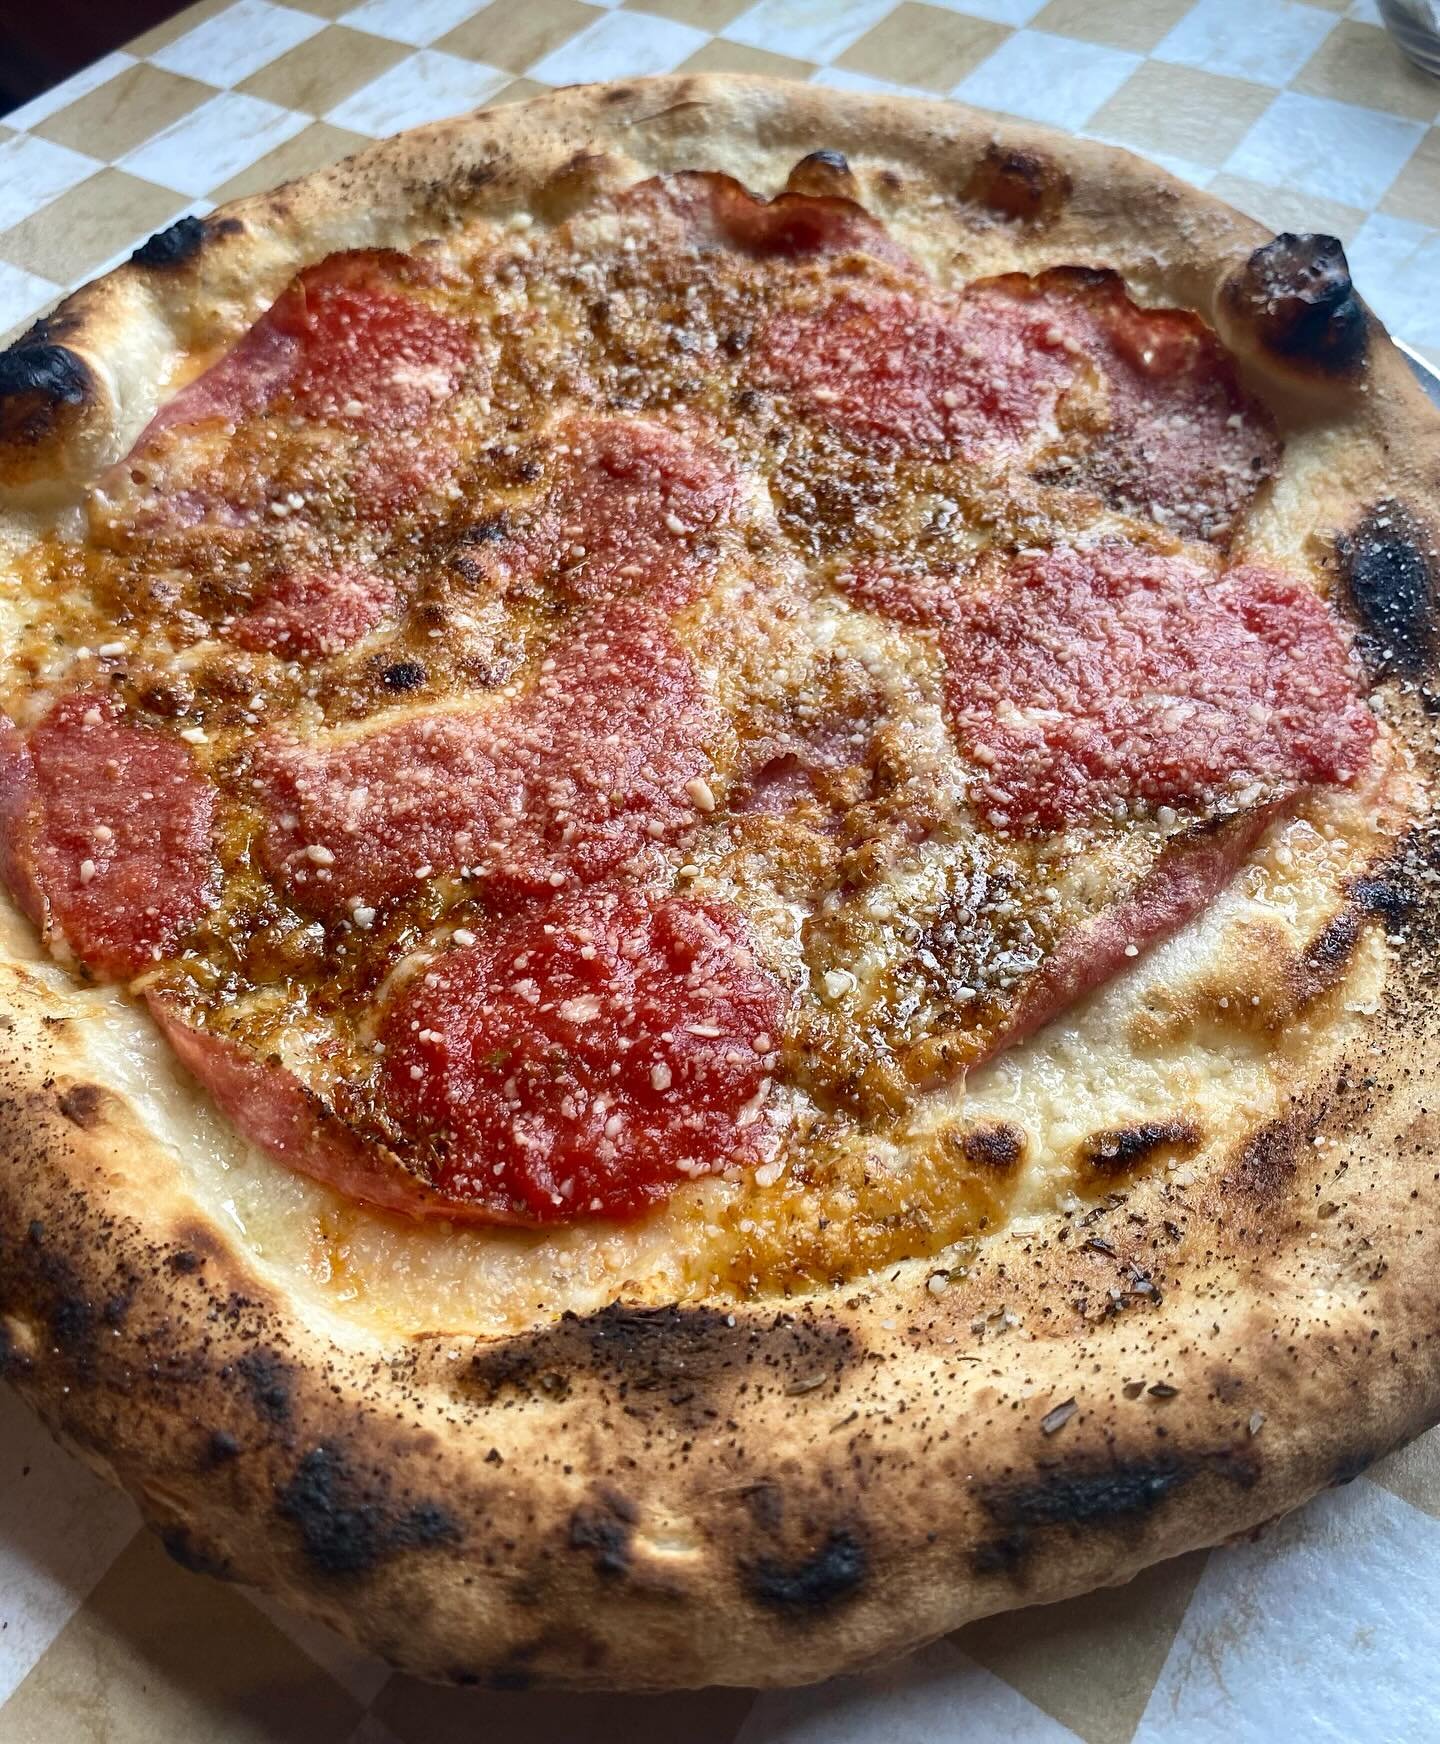 THE BIG CARMINE!!! Pizza of the Day is one of our originals and is named after an old friend. Come enjoy it with a friend! It&rsquo;s topped with Genoa Salami, Provolone , Garlic, Oregano and light Marinara!🍕🍕

Pizza is meant to be shared with frie